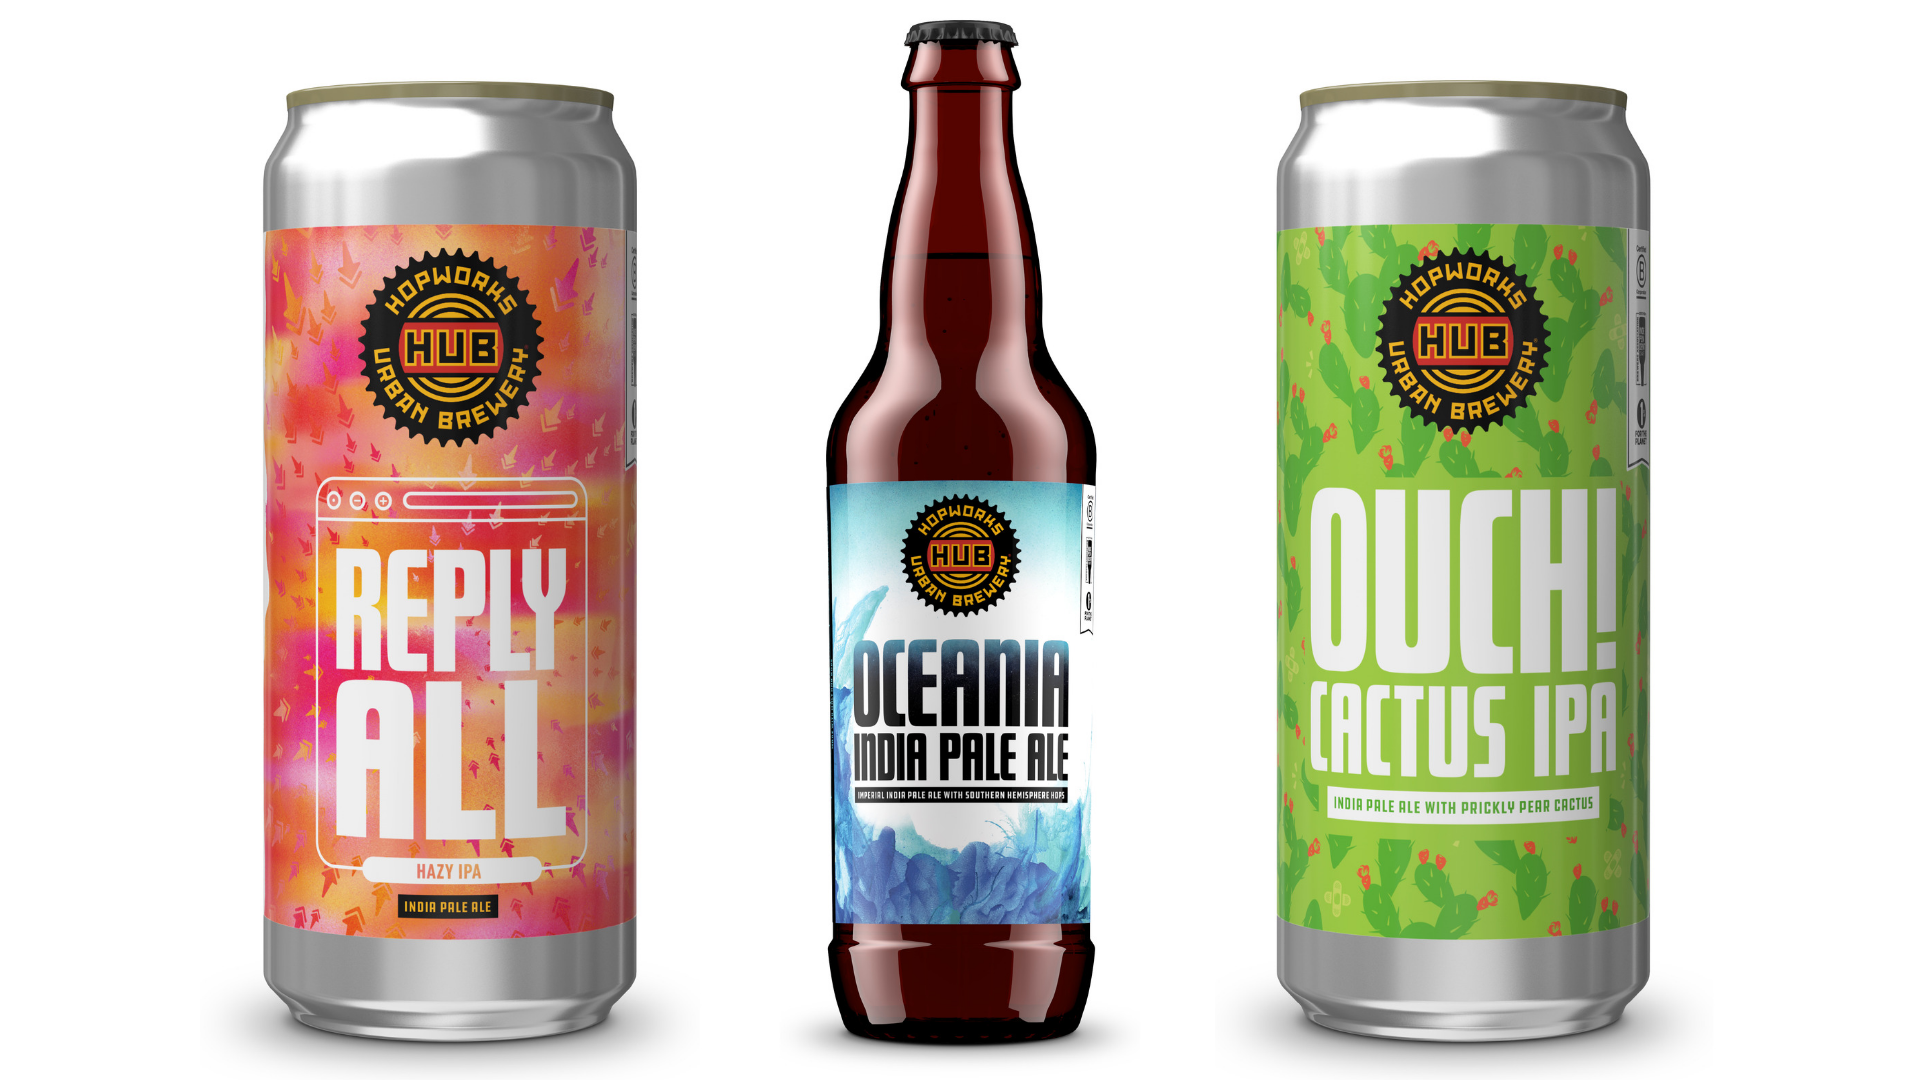 New April 2019 Beers From Hopworks Urban Brewery - Reply All Hazy IPA, Oceania IPA, Ouch! Cactus IPA